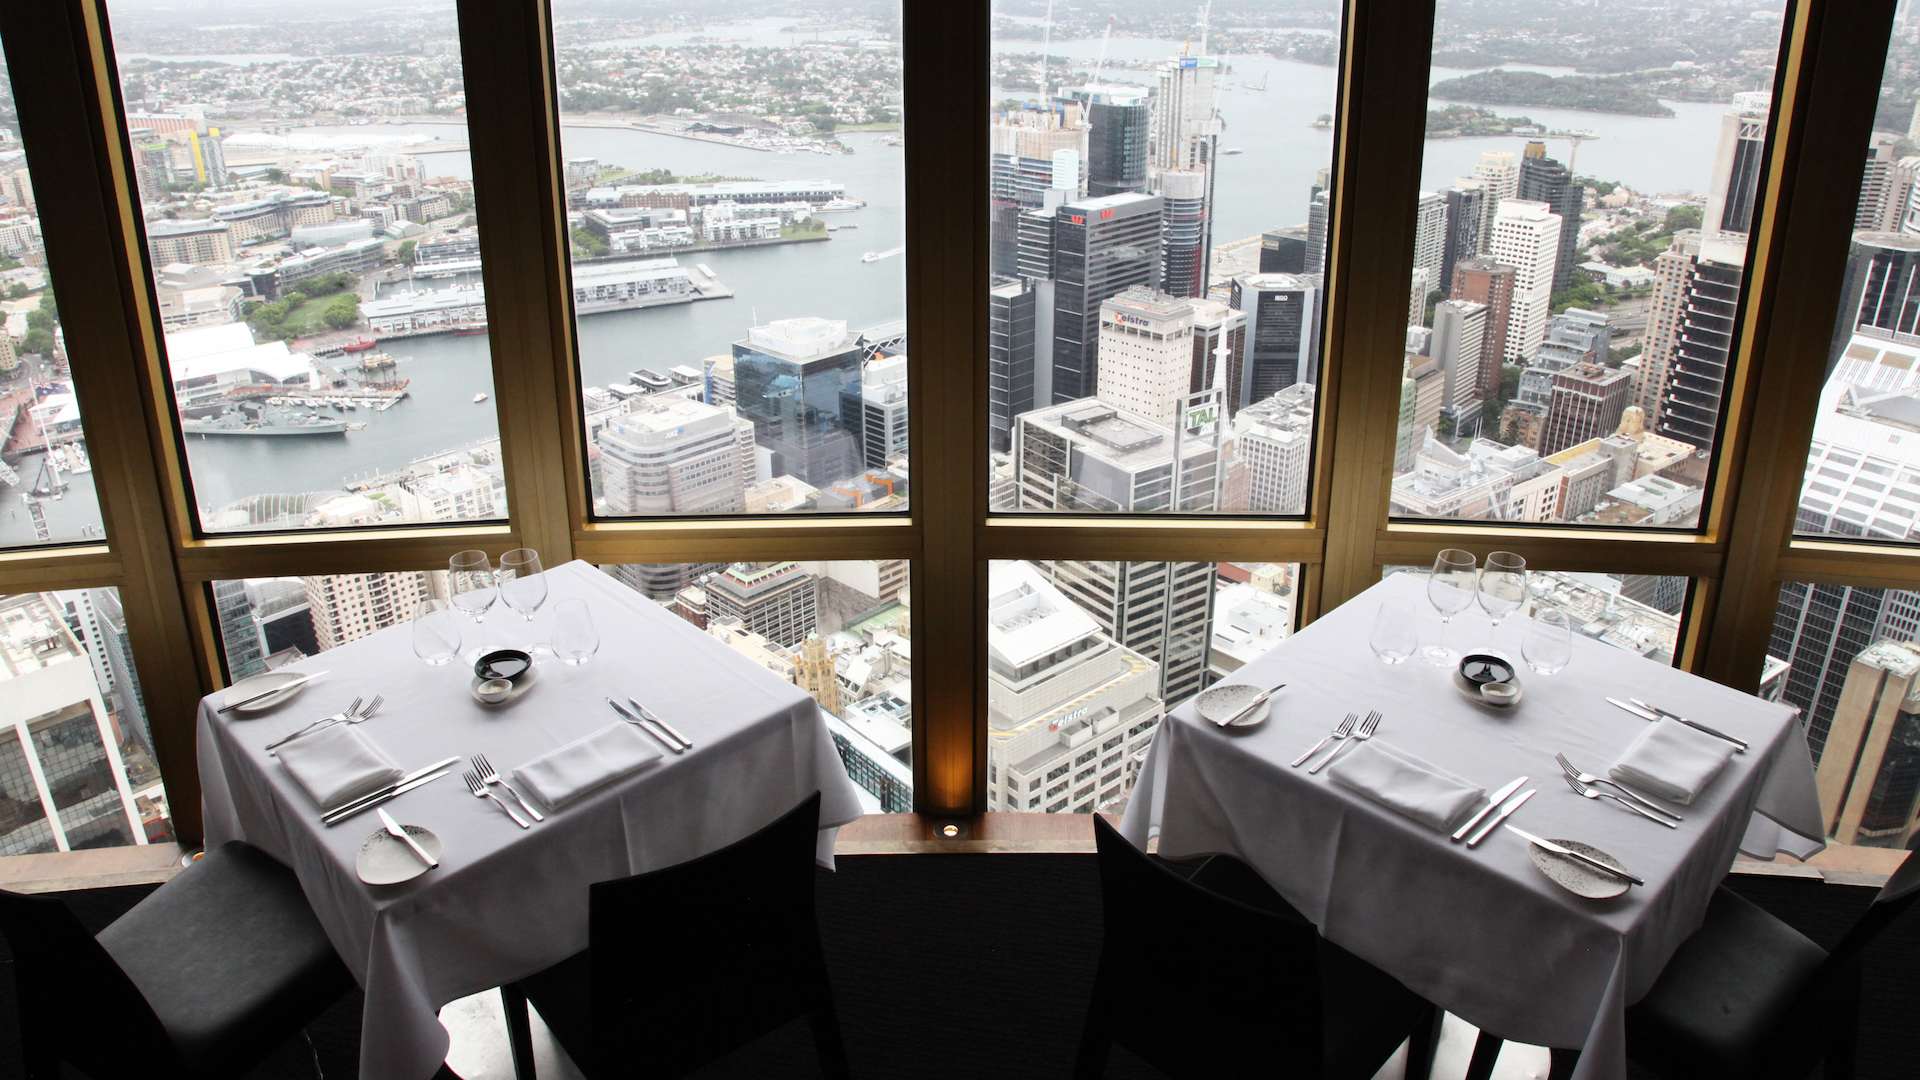 Sydney Tower Is Getting a Multimillion-Dollar Dining Precinct with Three Levels of Food and Drink Spots